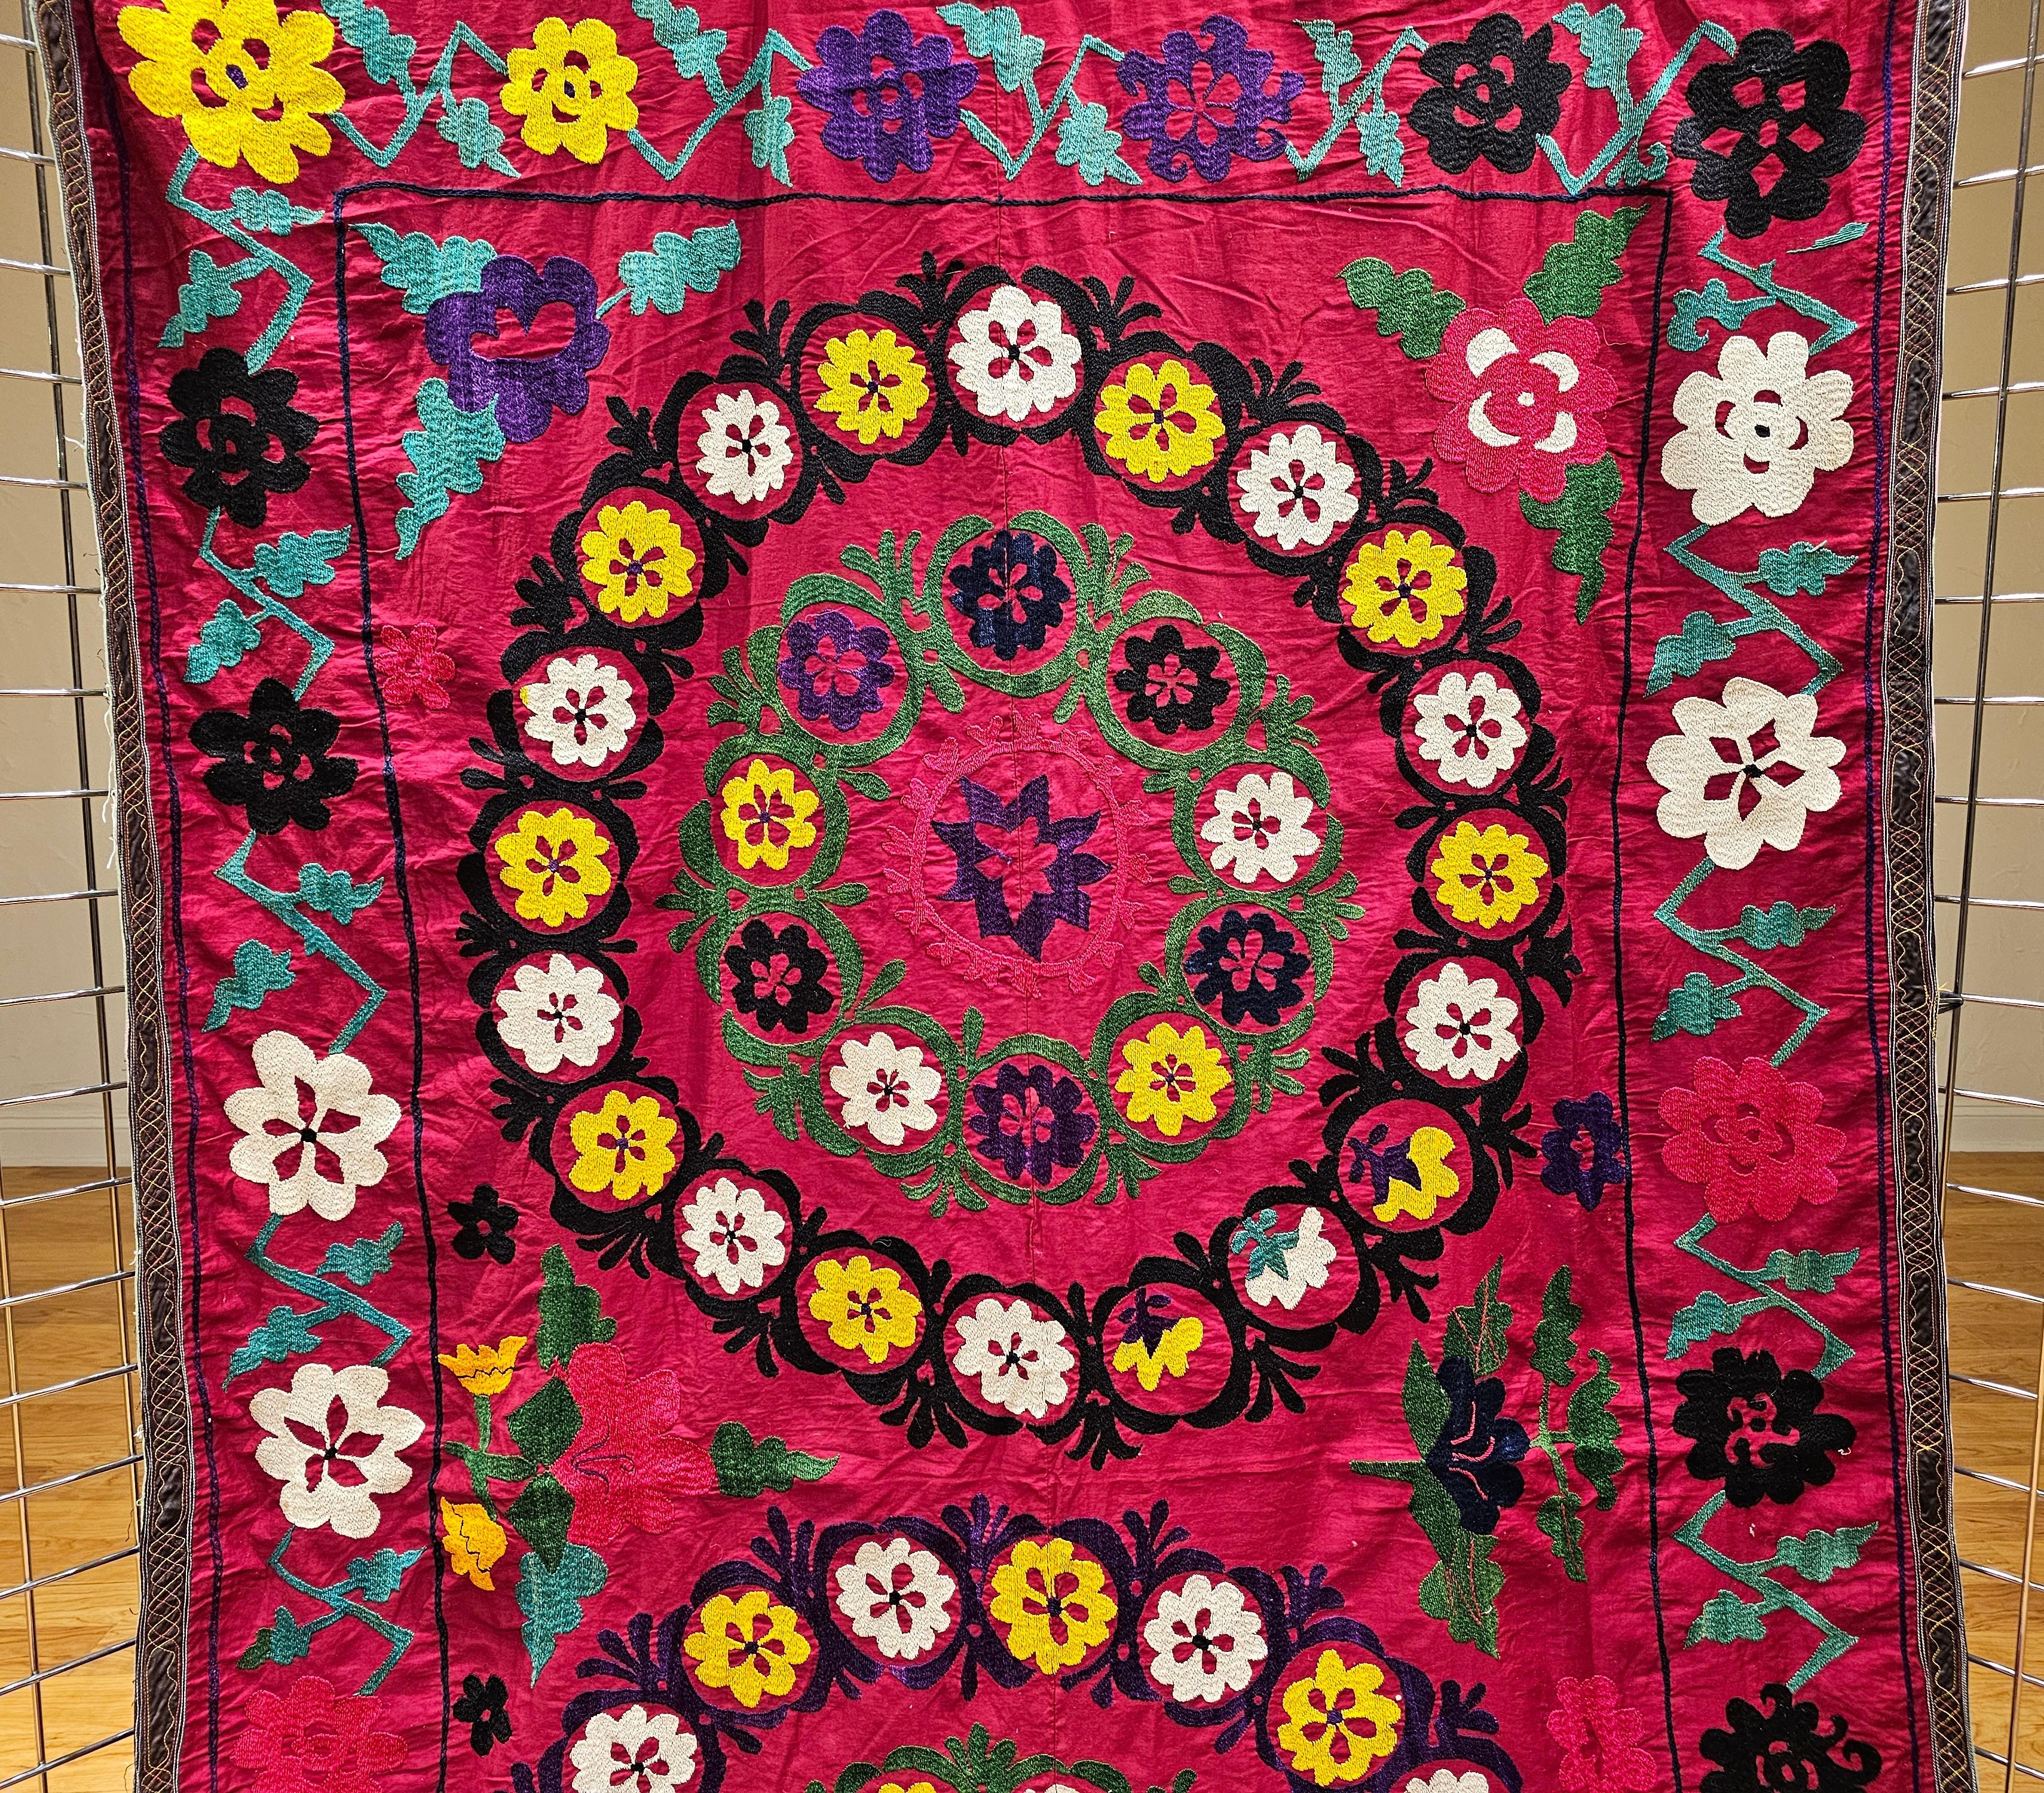 Hand-Crafted Vintage Uzbek Silk Embroidery Suzani in Crimson, Green, Ivory, Yellow, Purple For Sale